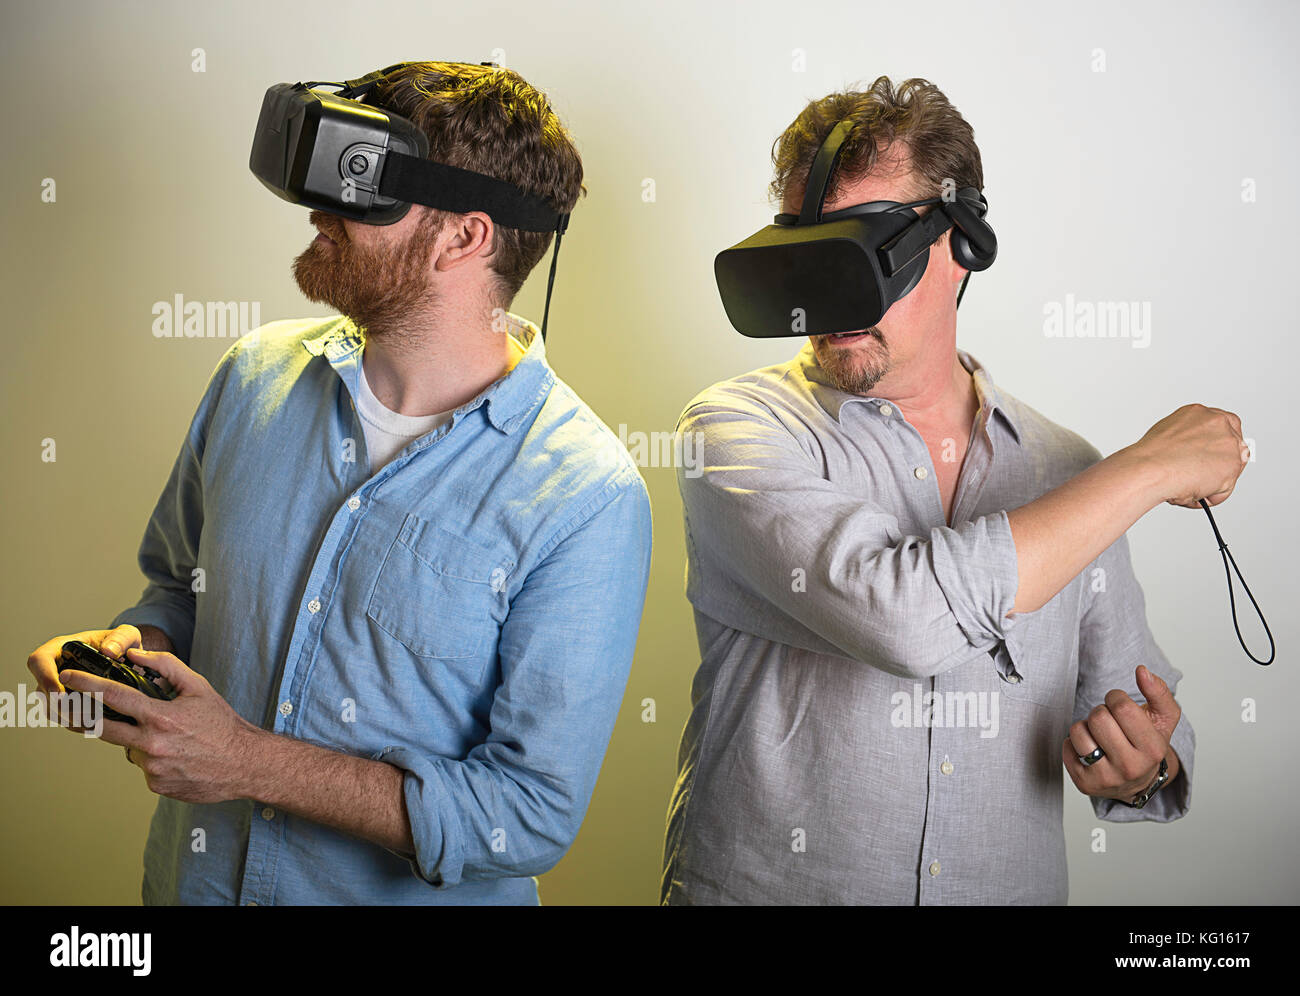 Two men playing with their VR headsets. Stock Photo